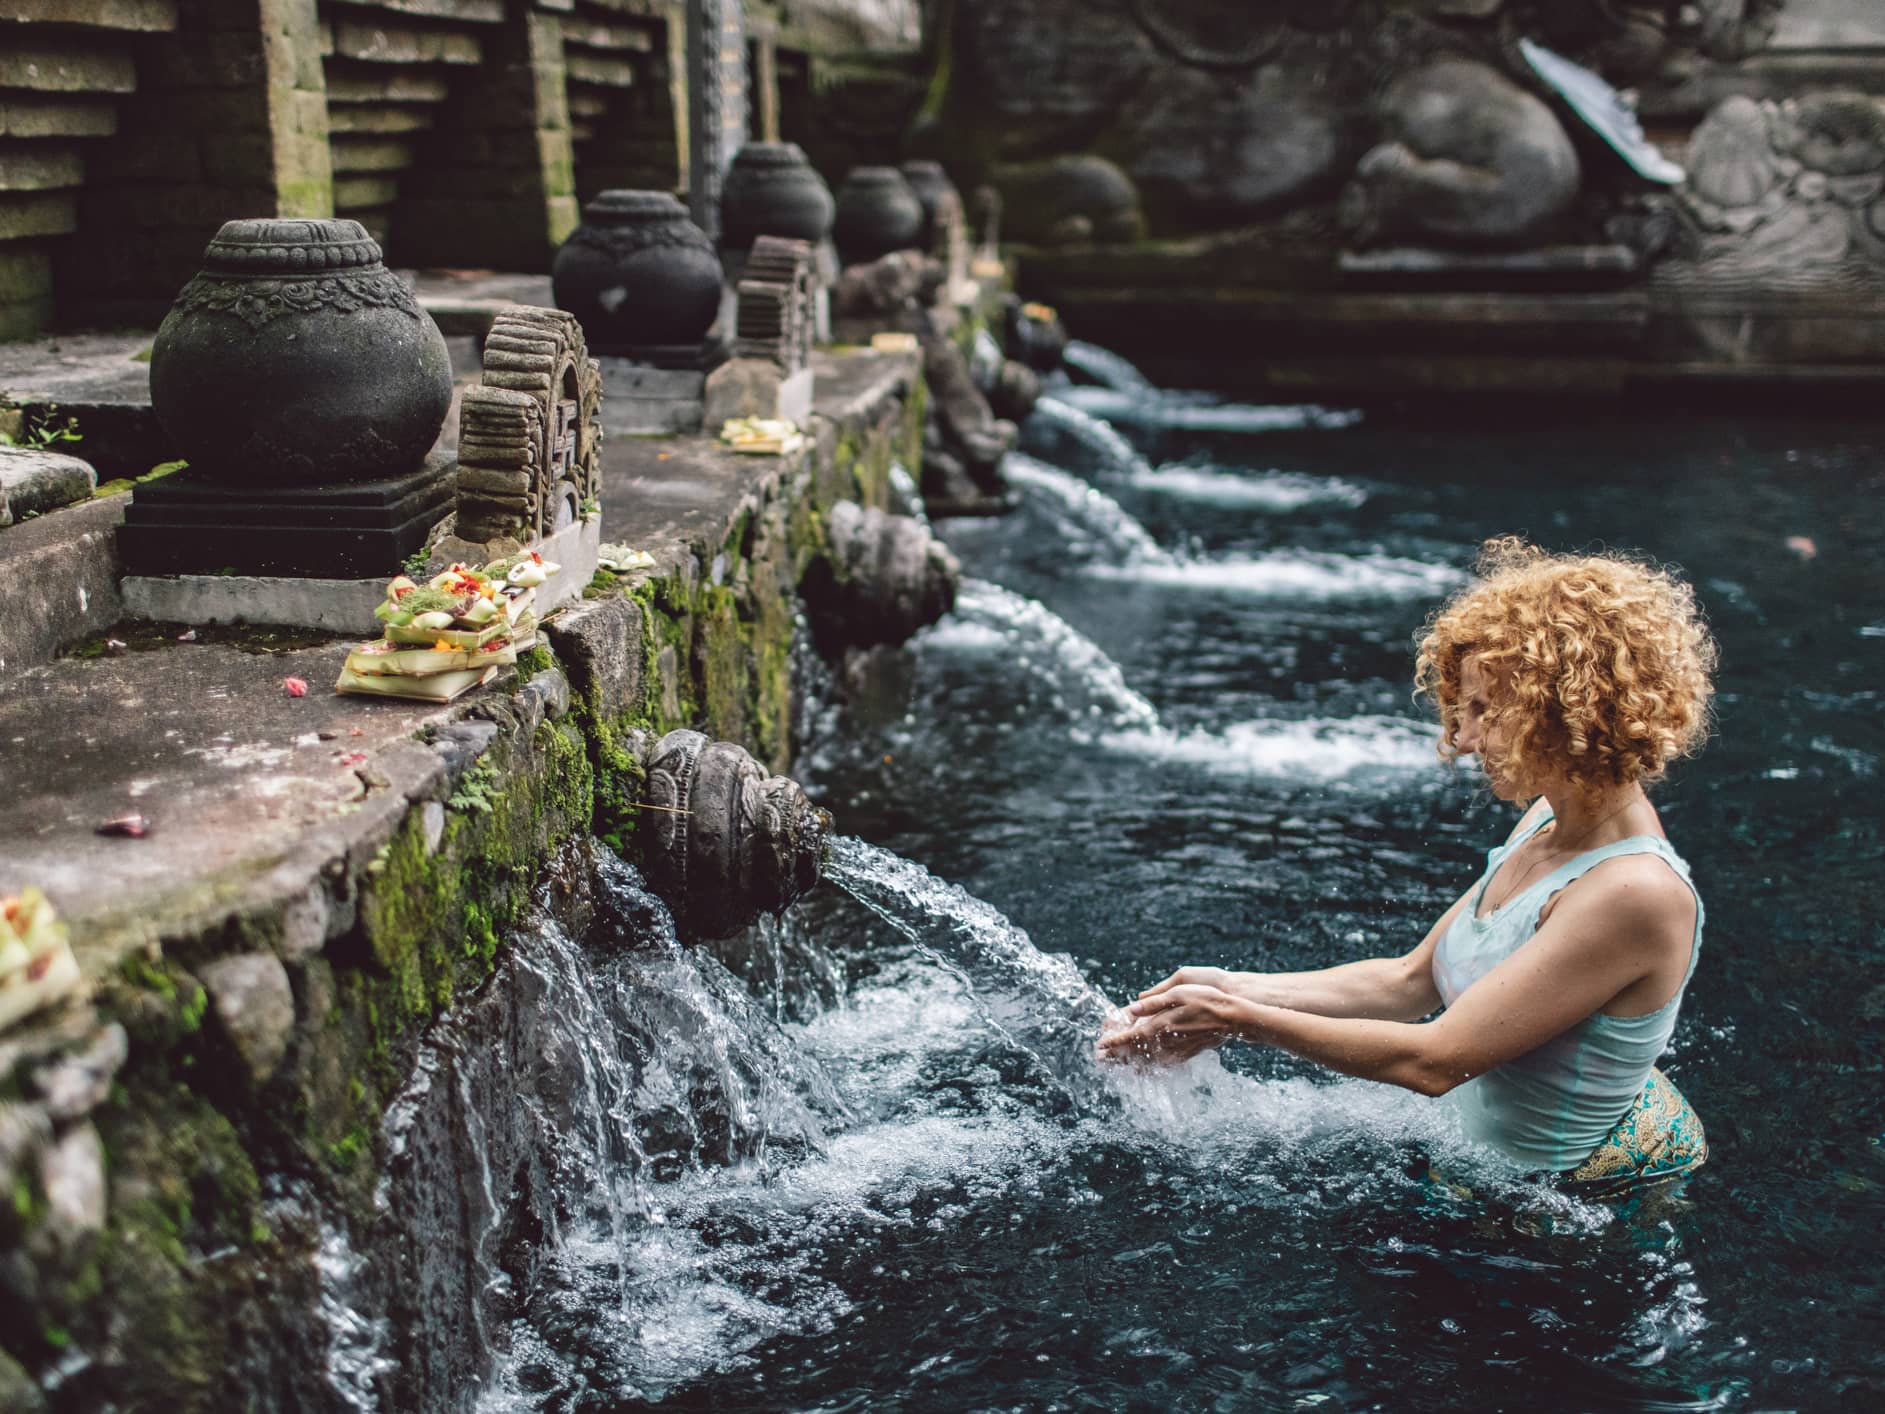  Experience a soul-cleansing ritual in Bali  